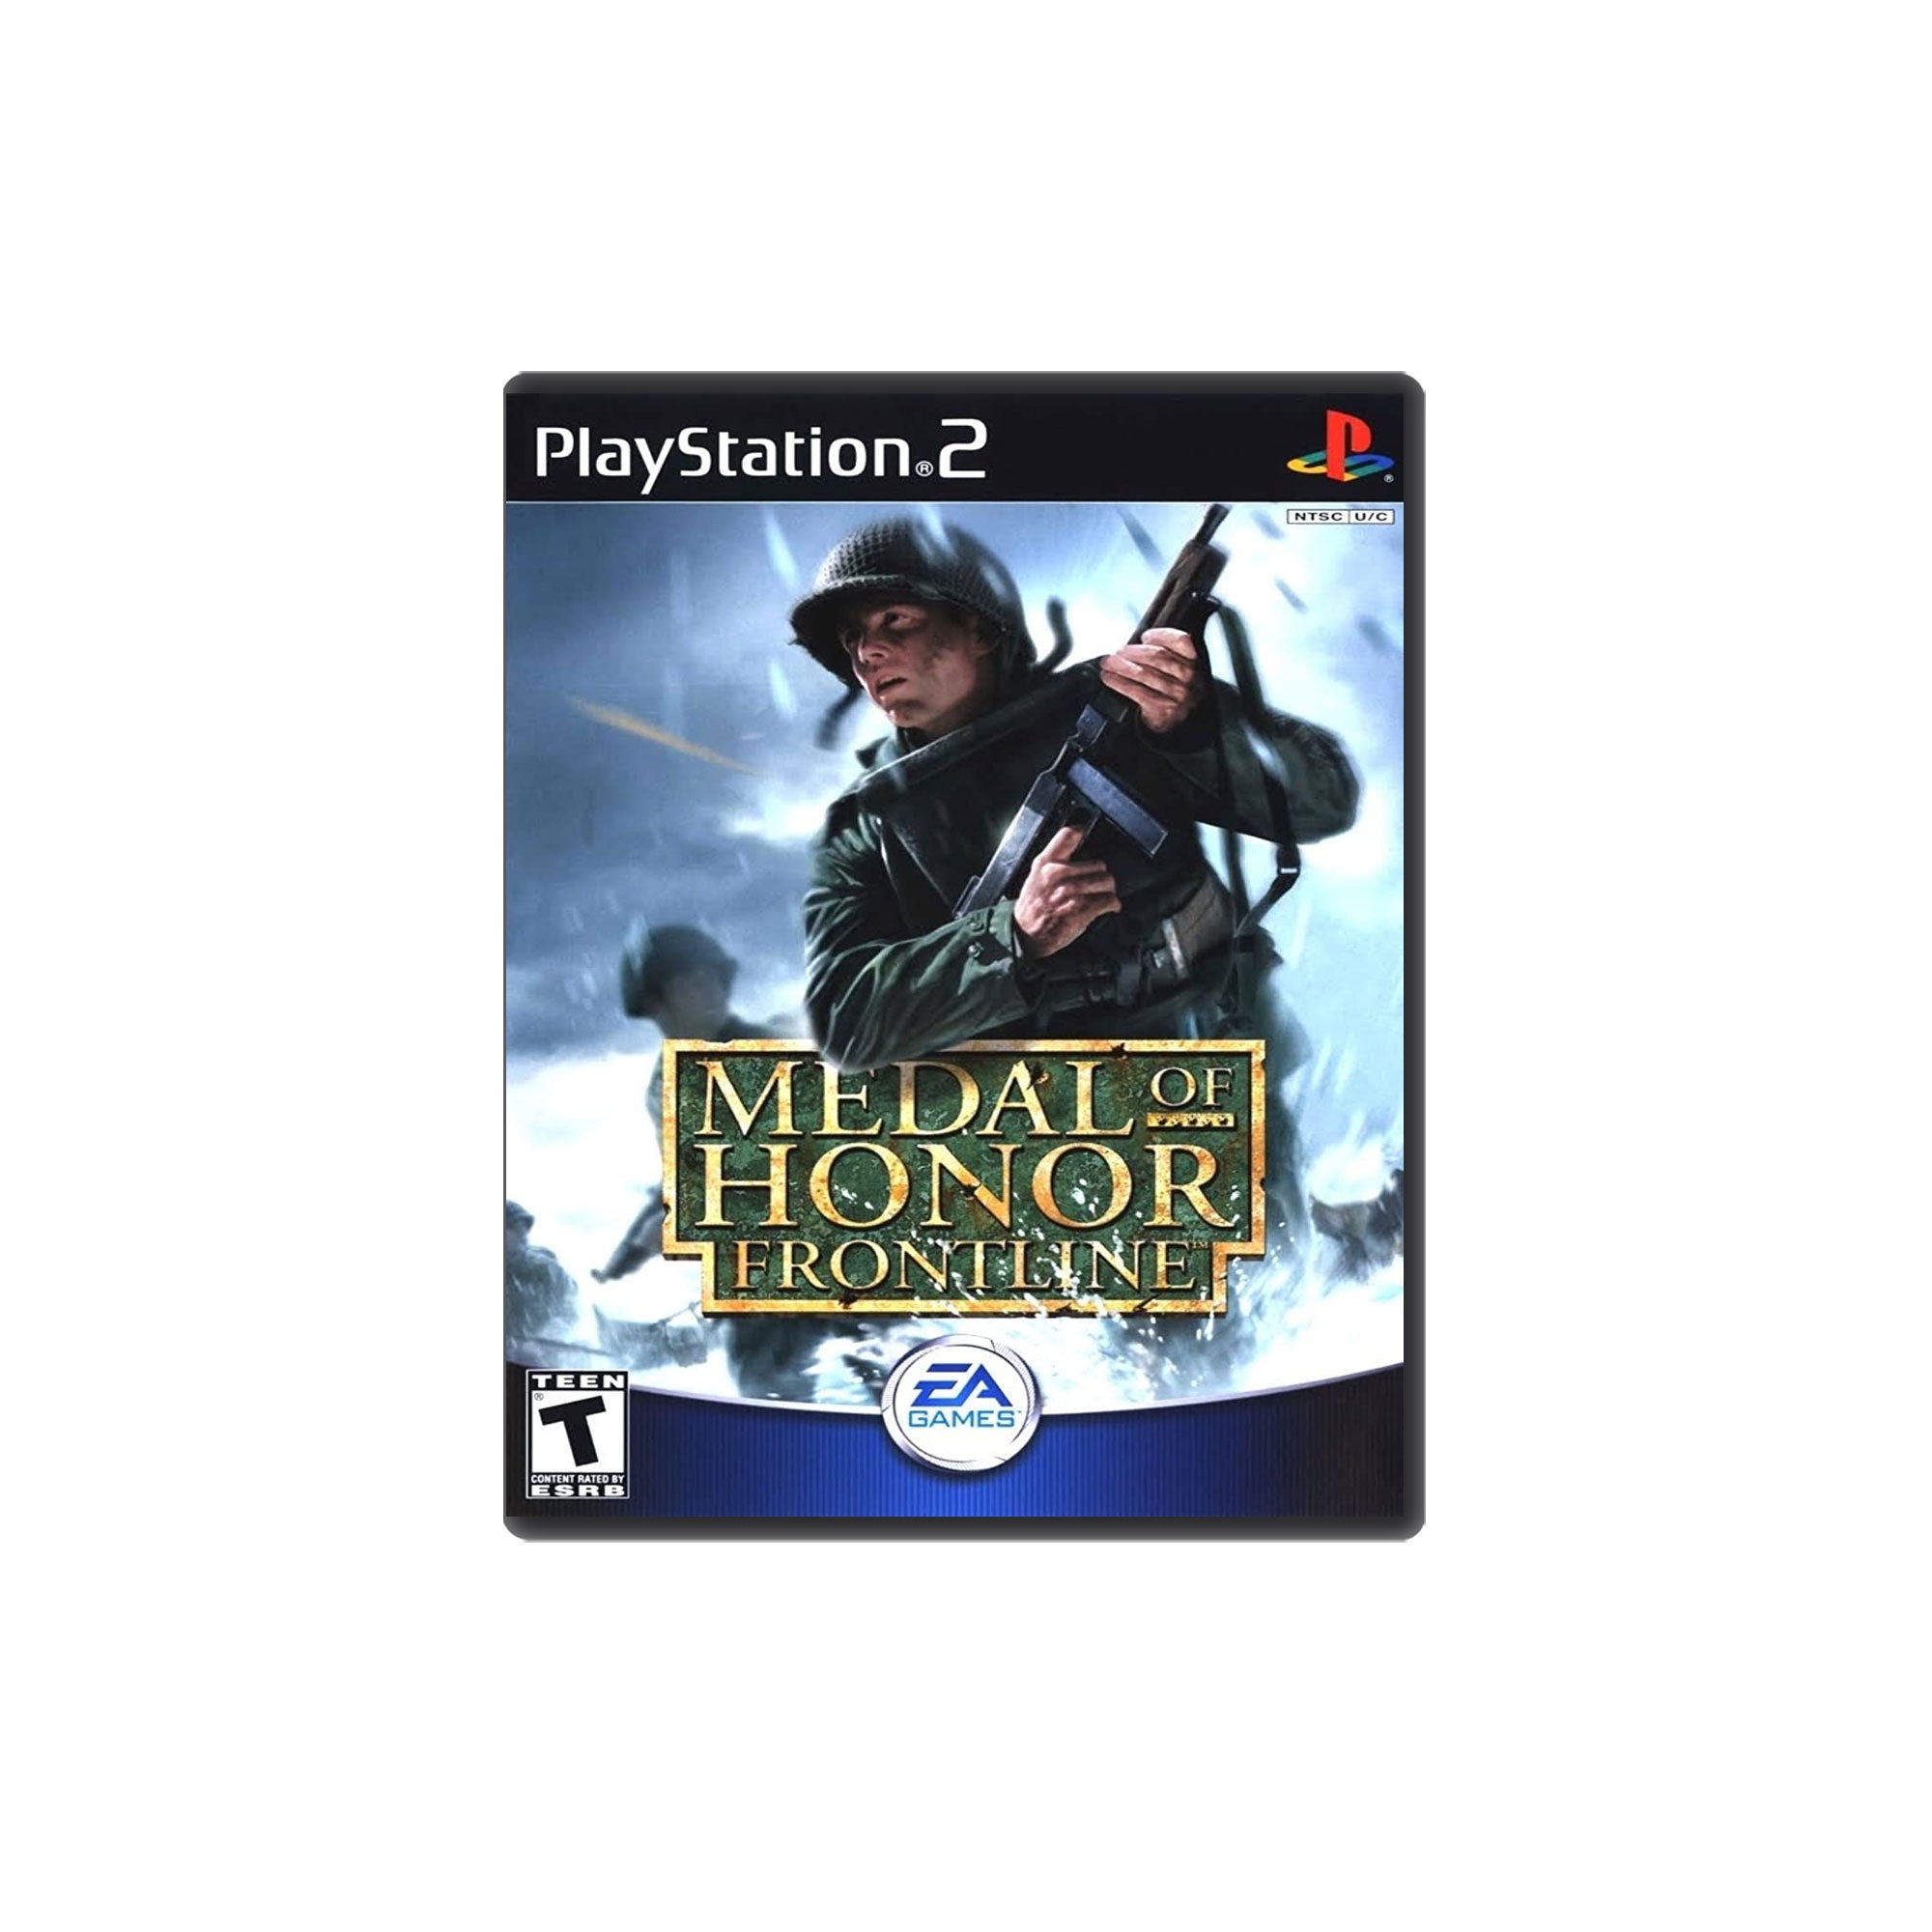 Swifty Games - Medal of Honor: Frontline (Playstation 2, 2002)